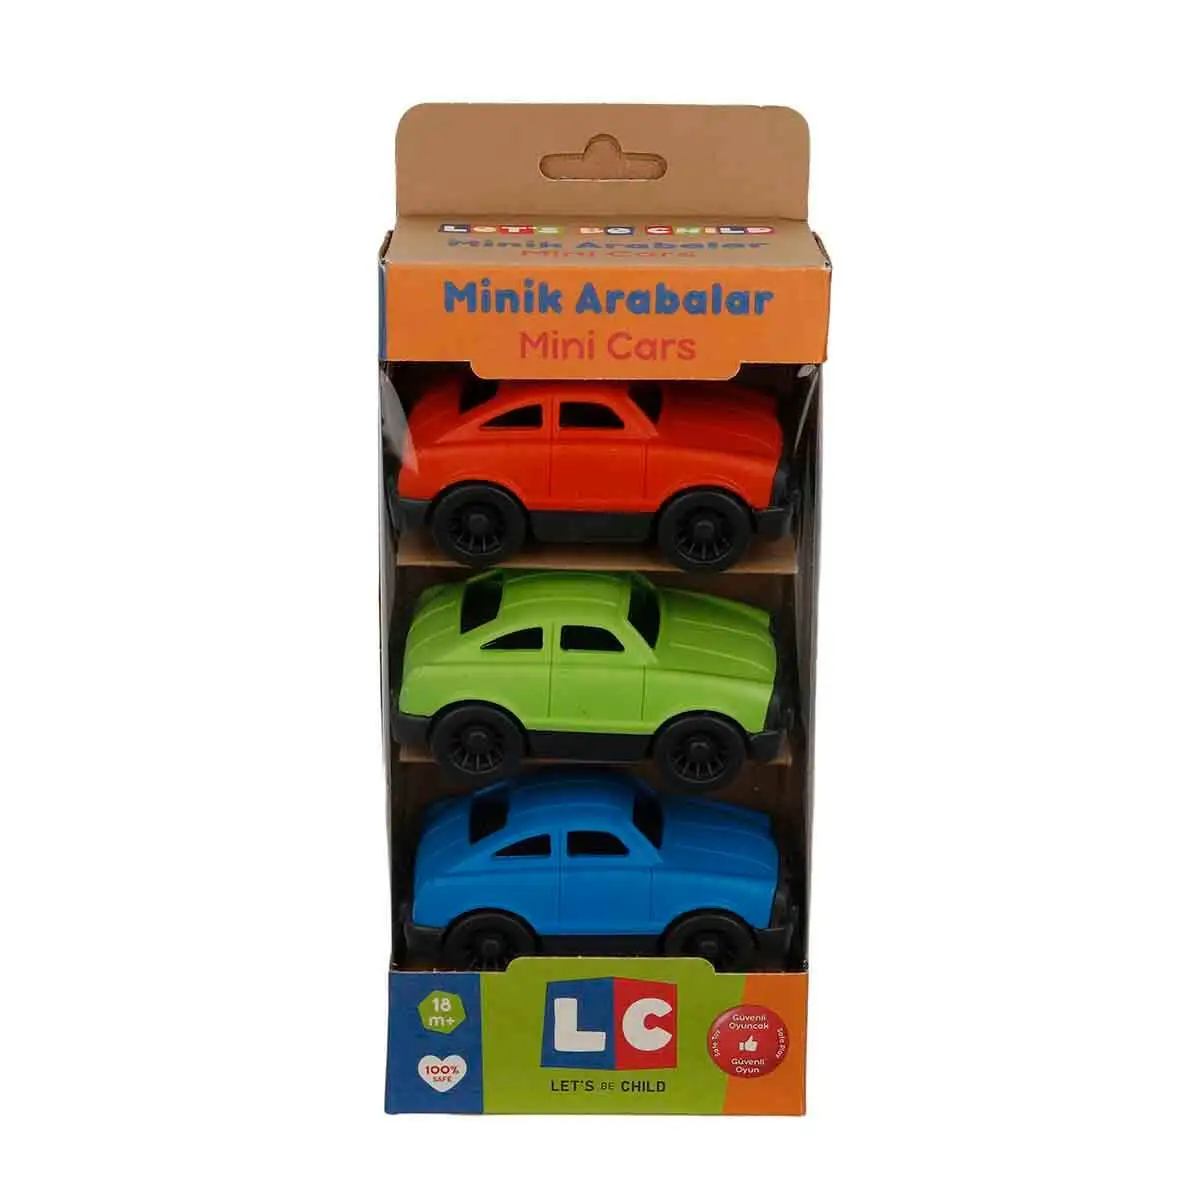 3'lü toy car set (Red Green Blue) and (Red Yellow White) groups.